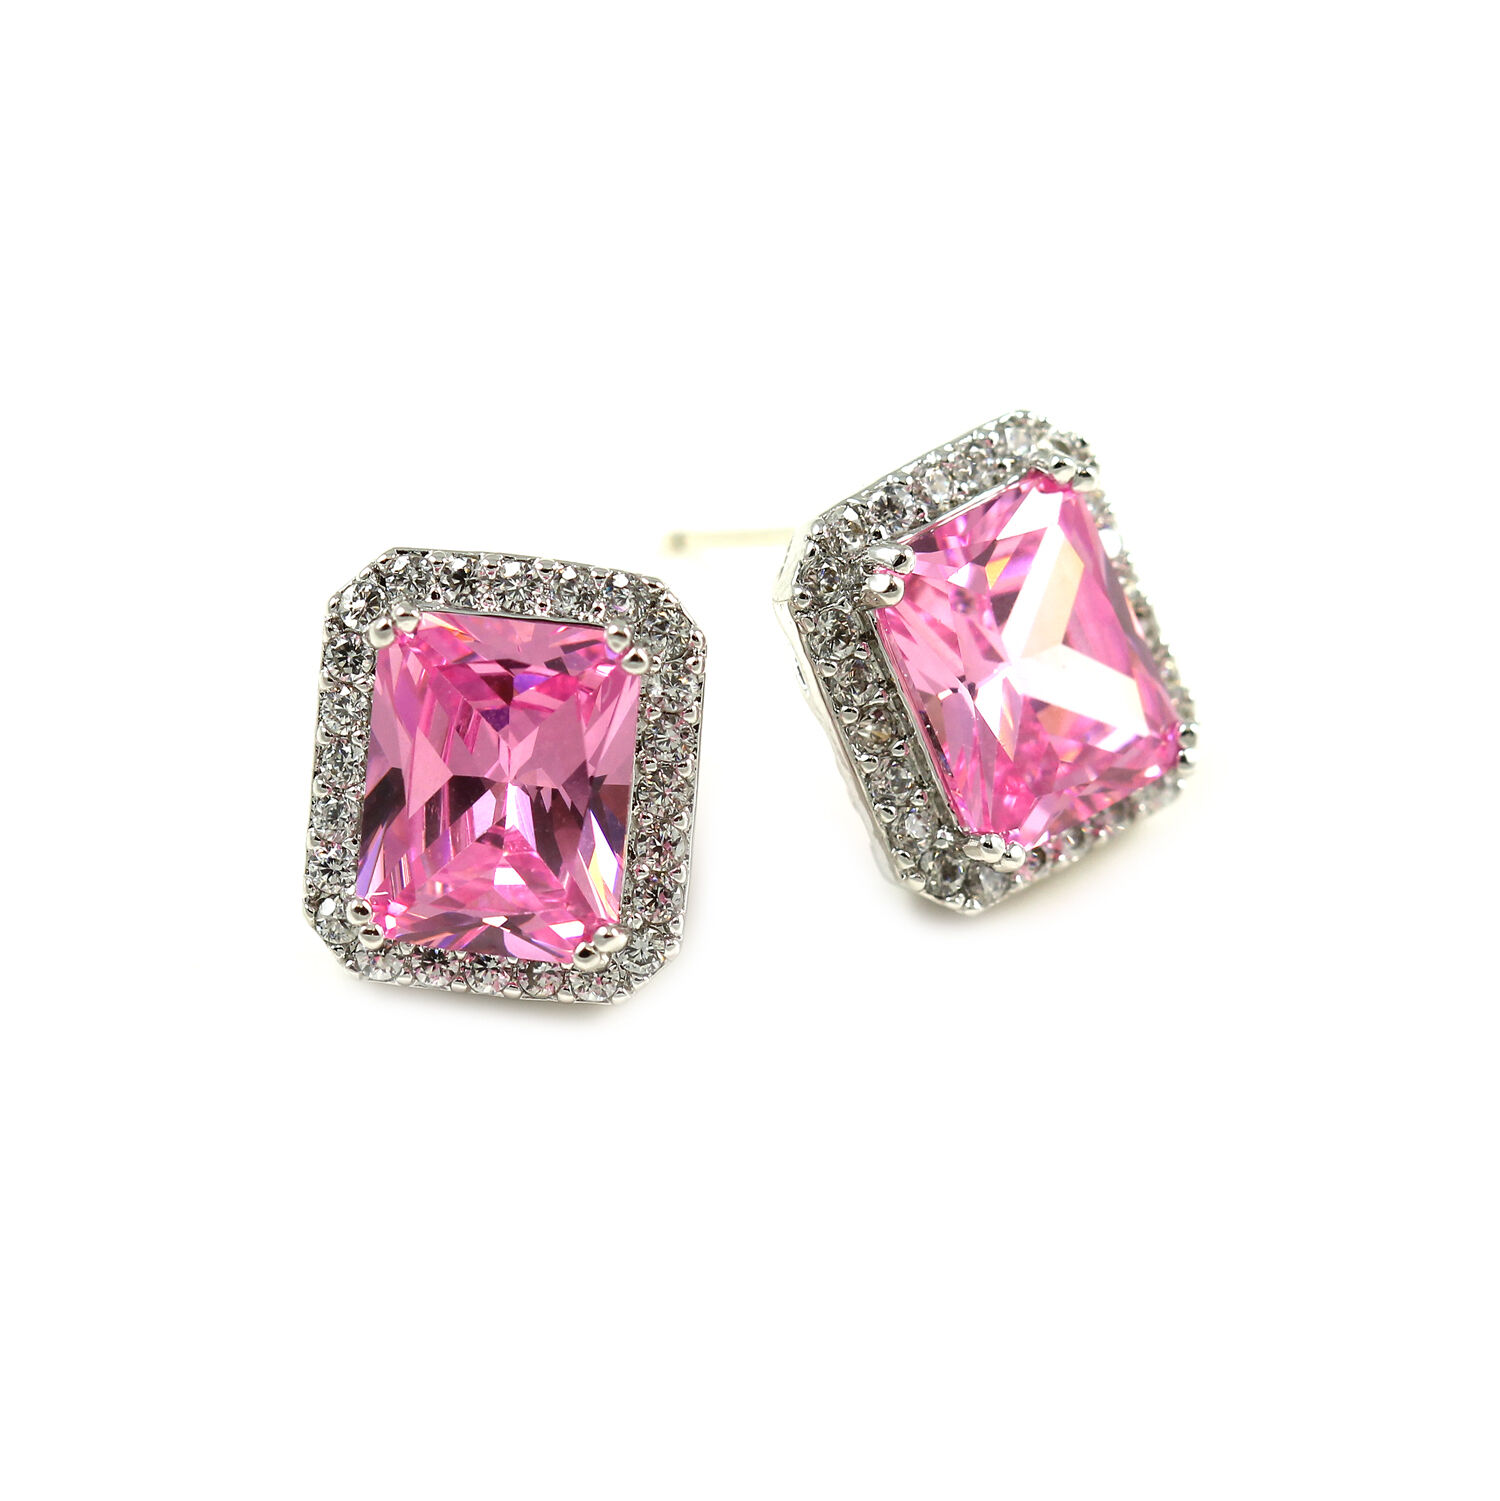 Kristin Perry Cz Crystal  Square Cut Stud Earrings